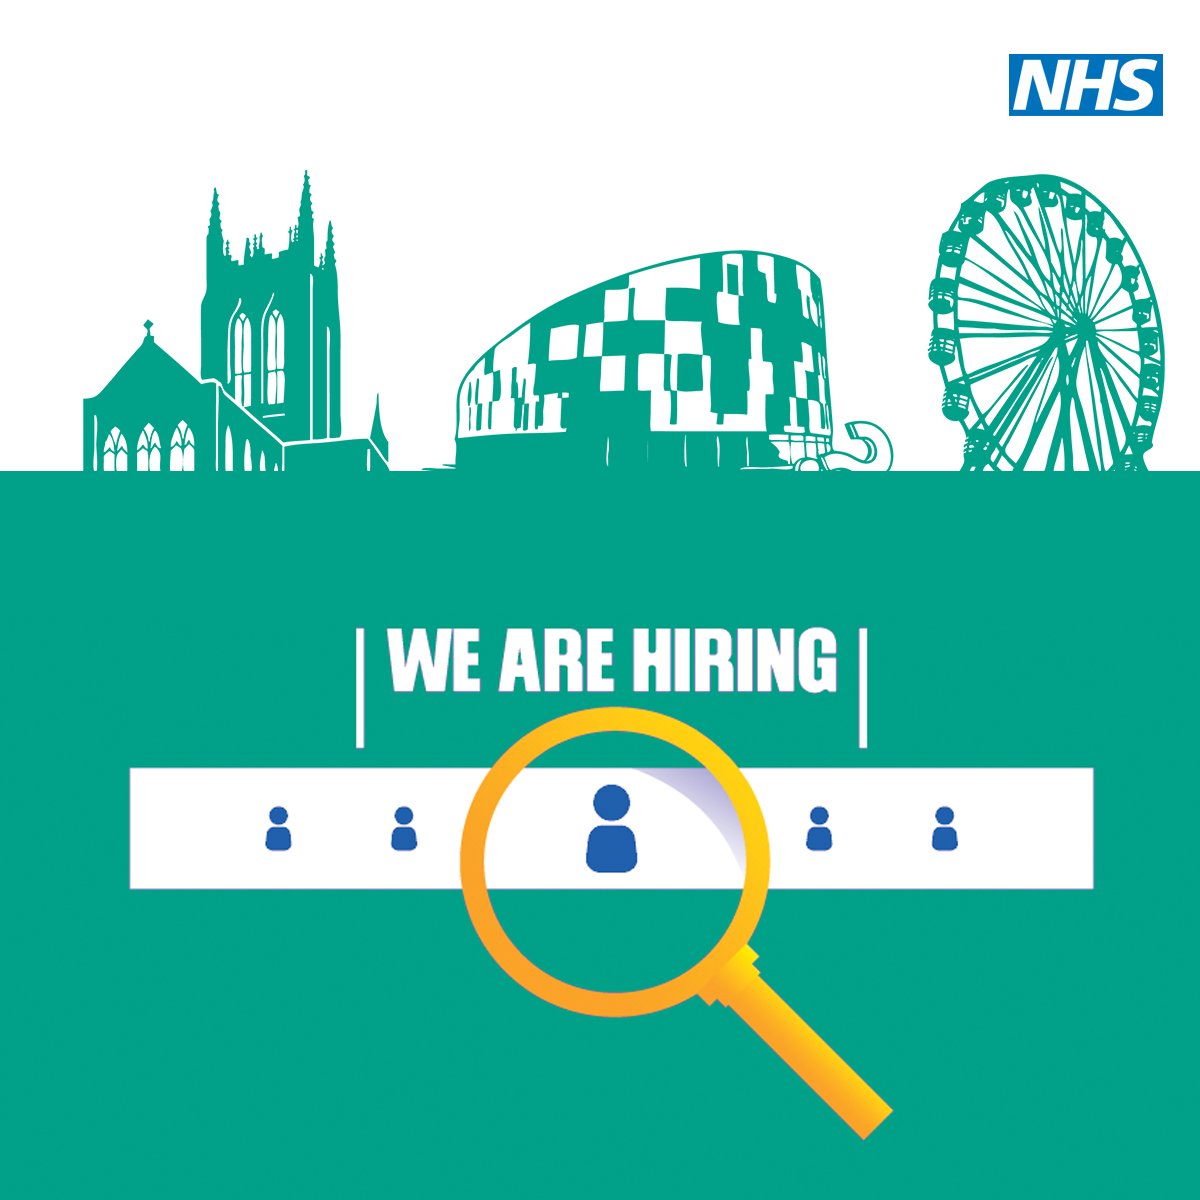 We have a new job vacancy - High Cost Drugs Technician - read more ow.ly/ueWx50RFlZy